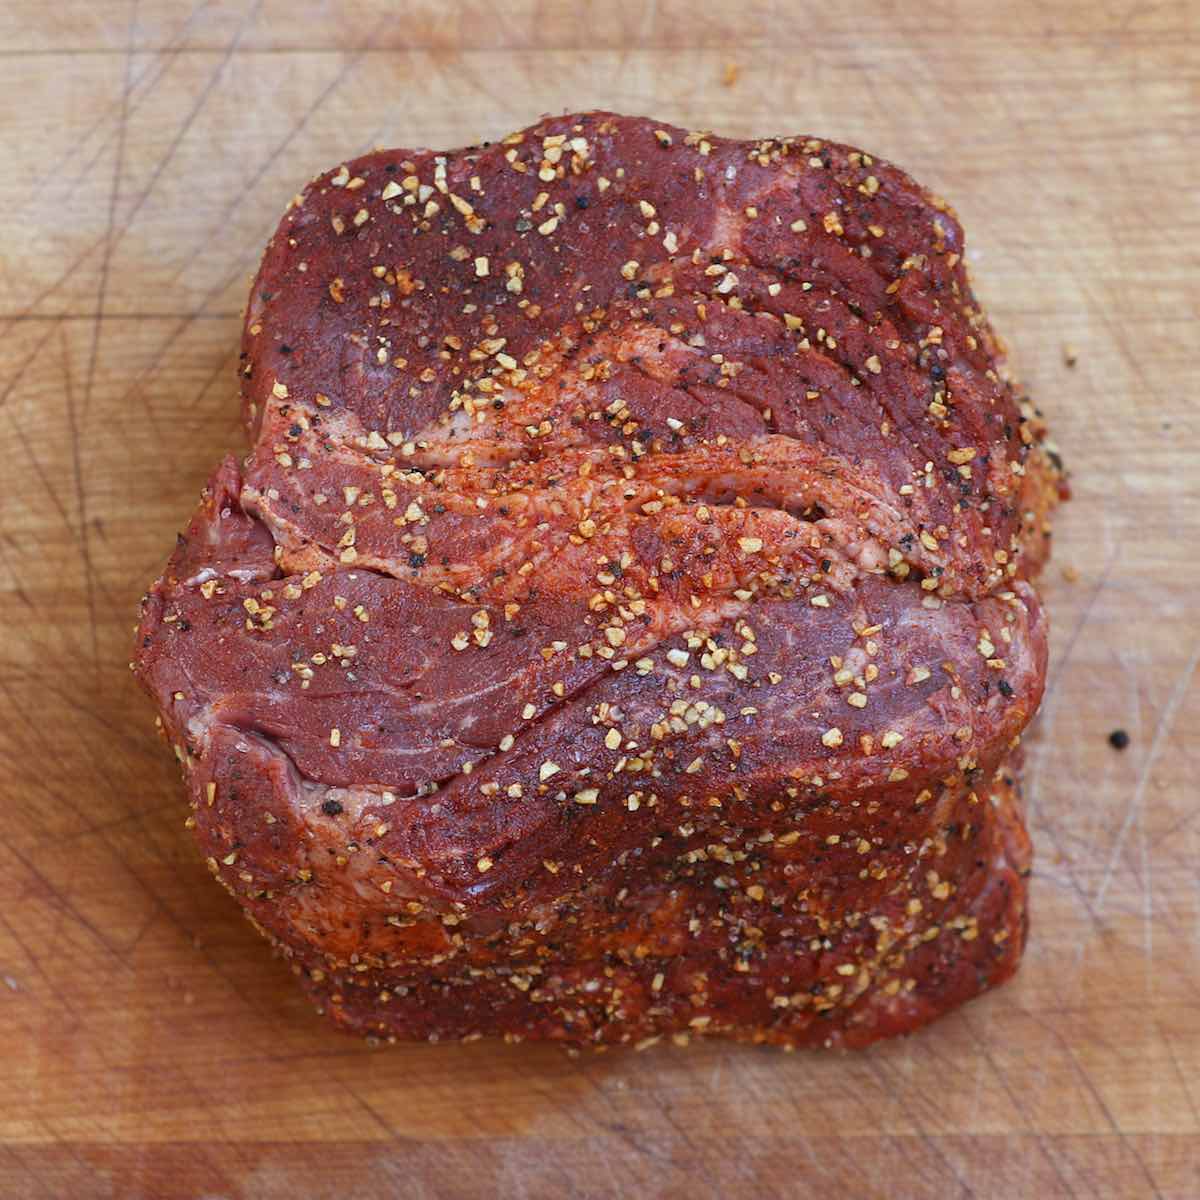 A square cut of chuck roast rubbed with seasonings and showing its beautiful marbling underneath